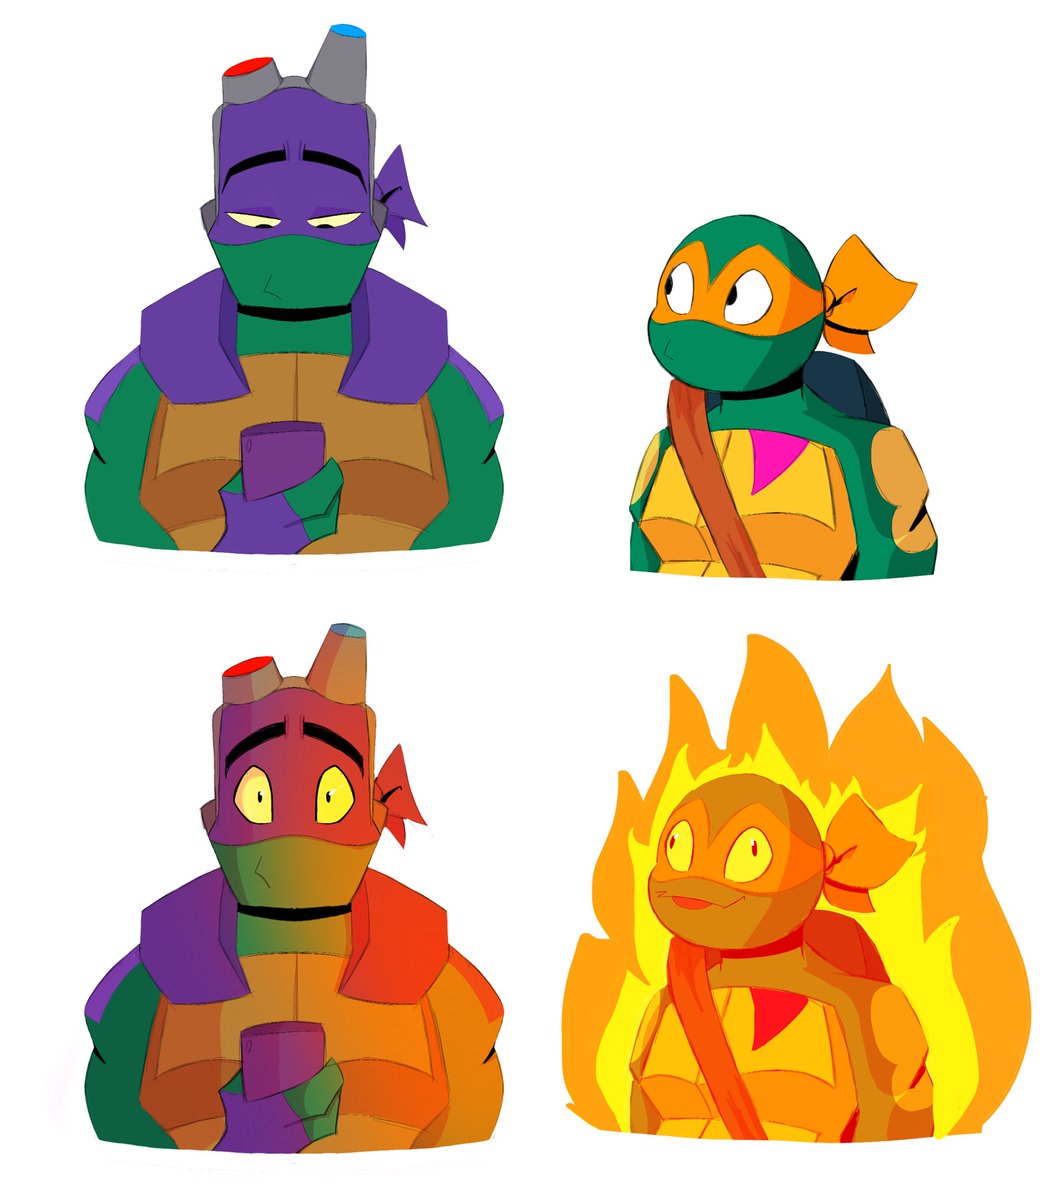 Don’t you just hate it when your little brother sets himself on fire because he isn’t getting enough attention? 
#tmntfanart #rottmnt #TMNT #rottmntfanart #tmntcomic #SaveRiseofTMNT #rottmntdonnie #rottmntmikey #rottmntcomic #RiseoftheTMNT #fanart